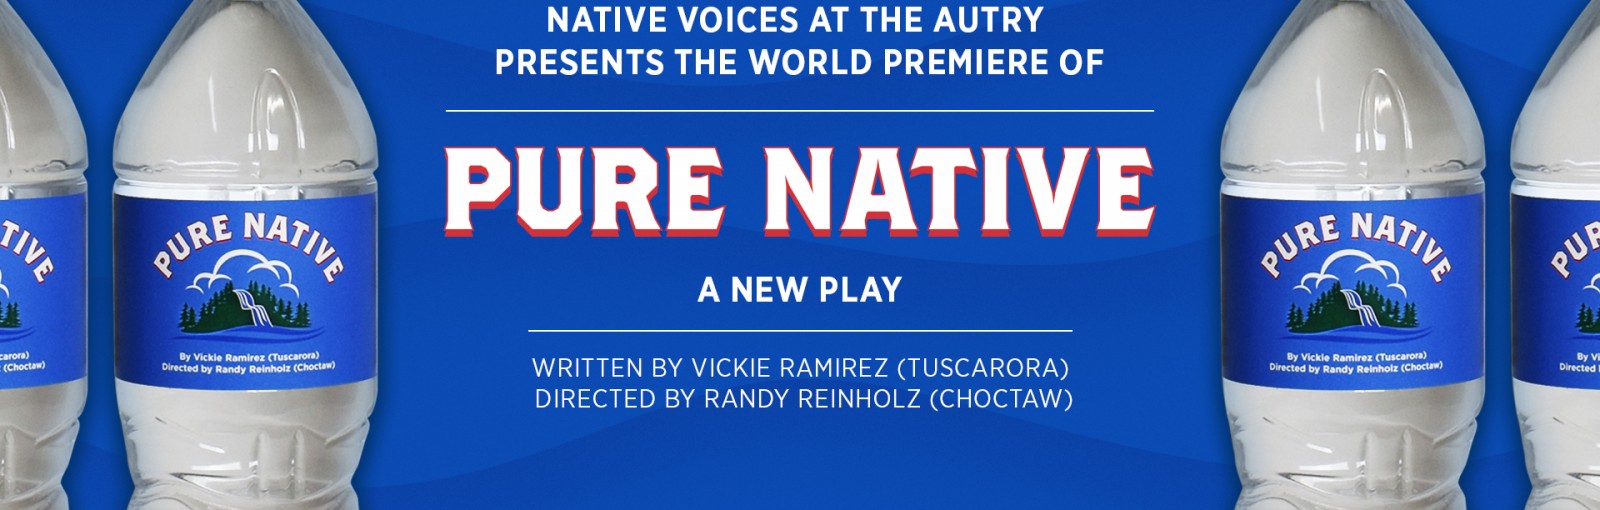 Native Voices at the Autry Presents the World Premiere of Pure Native